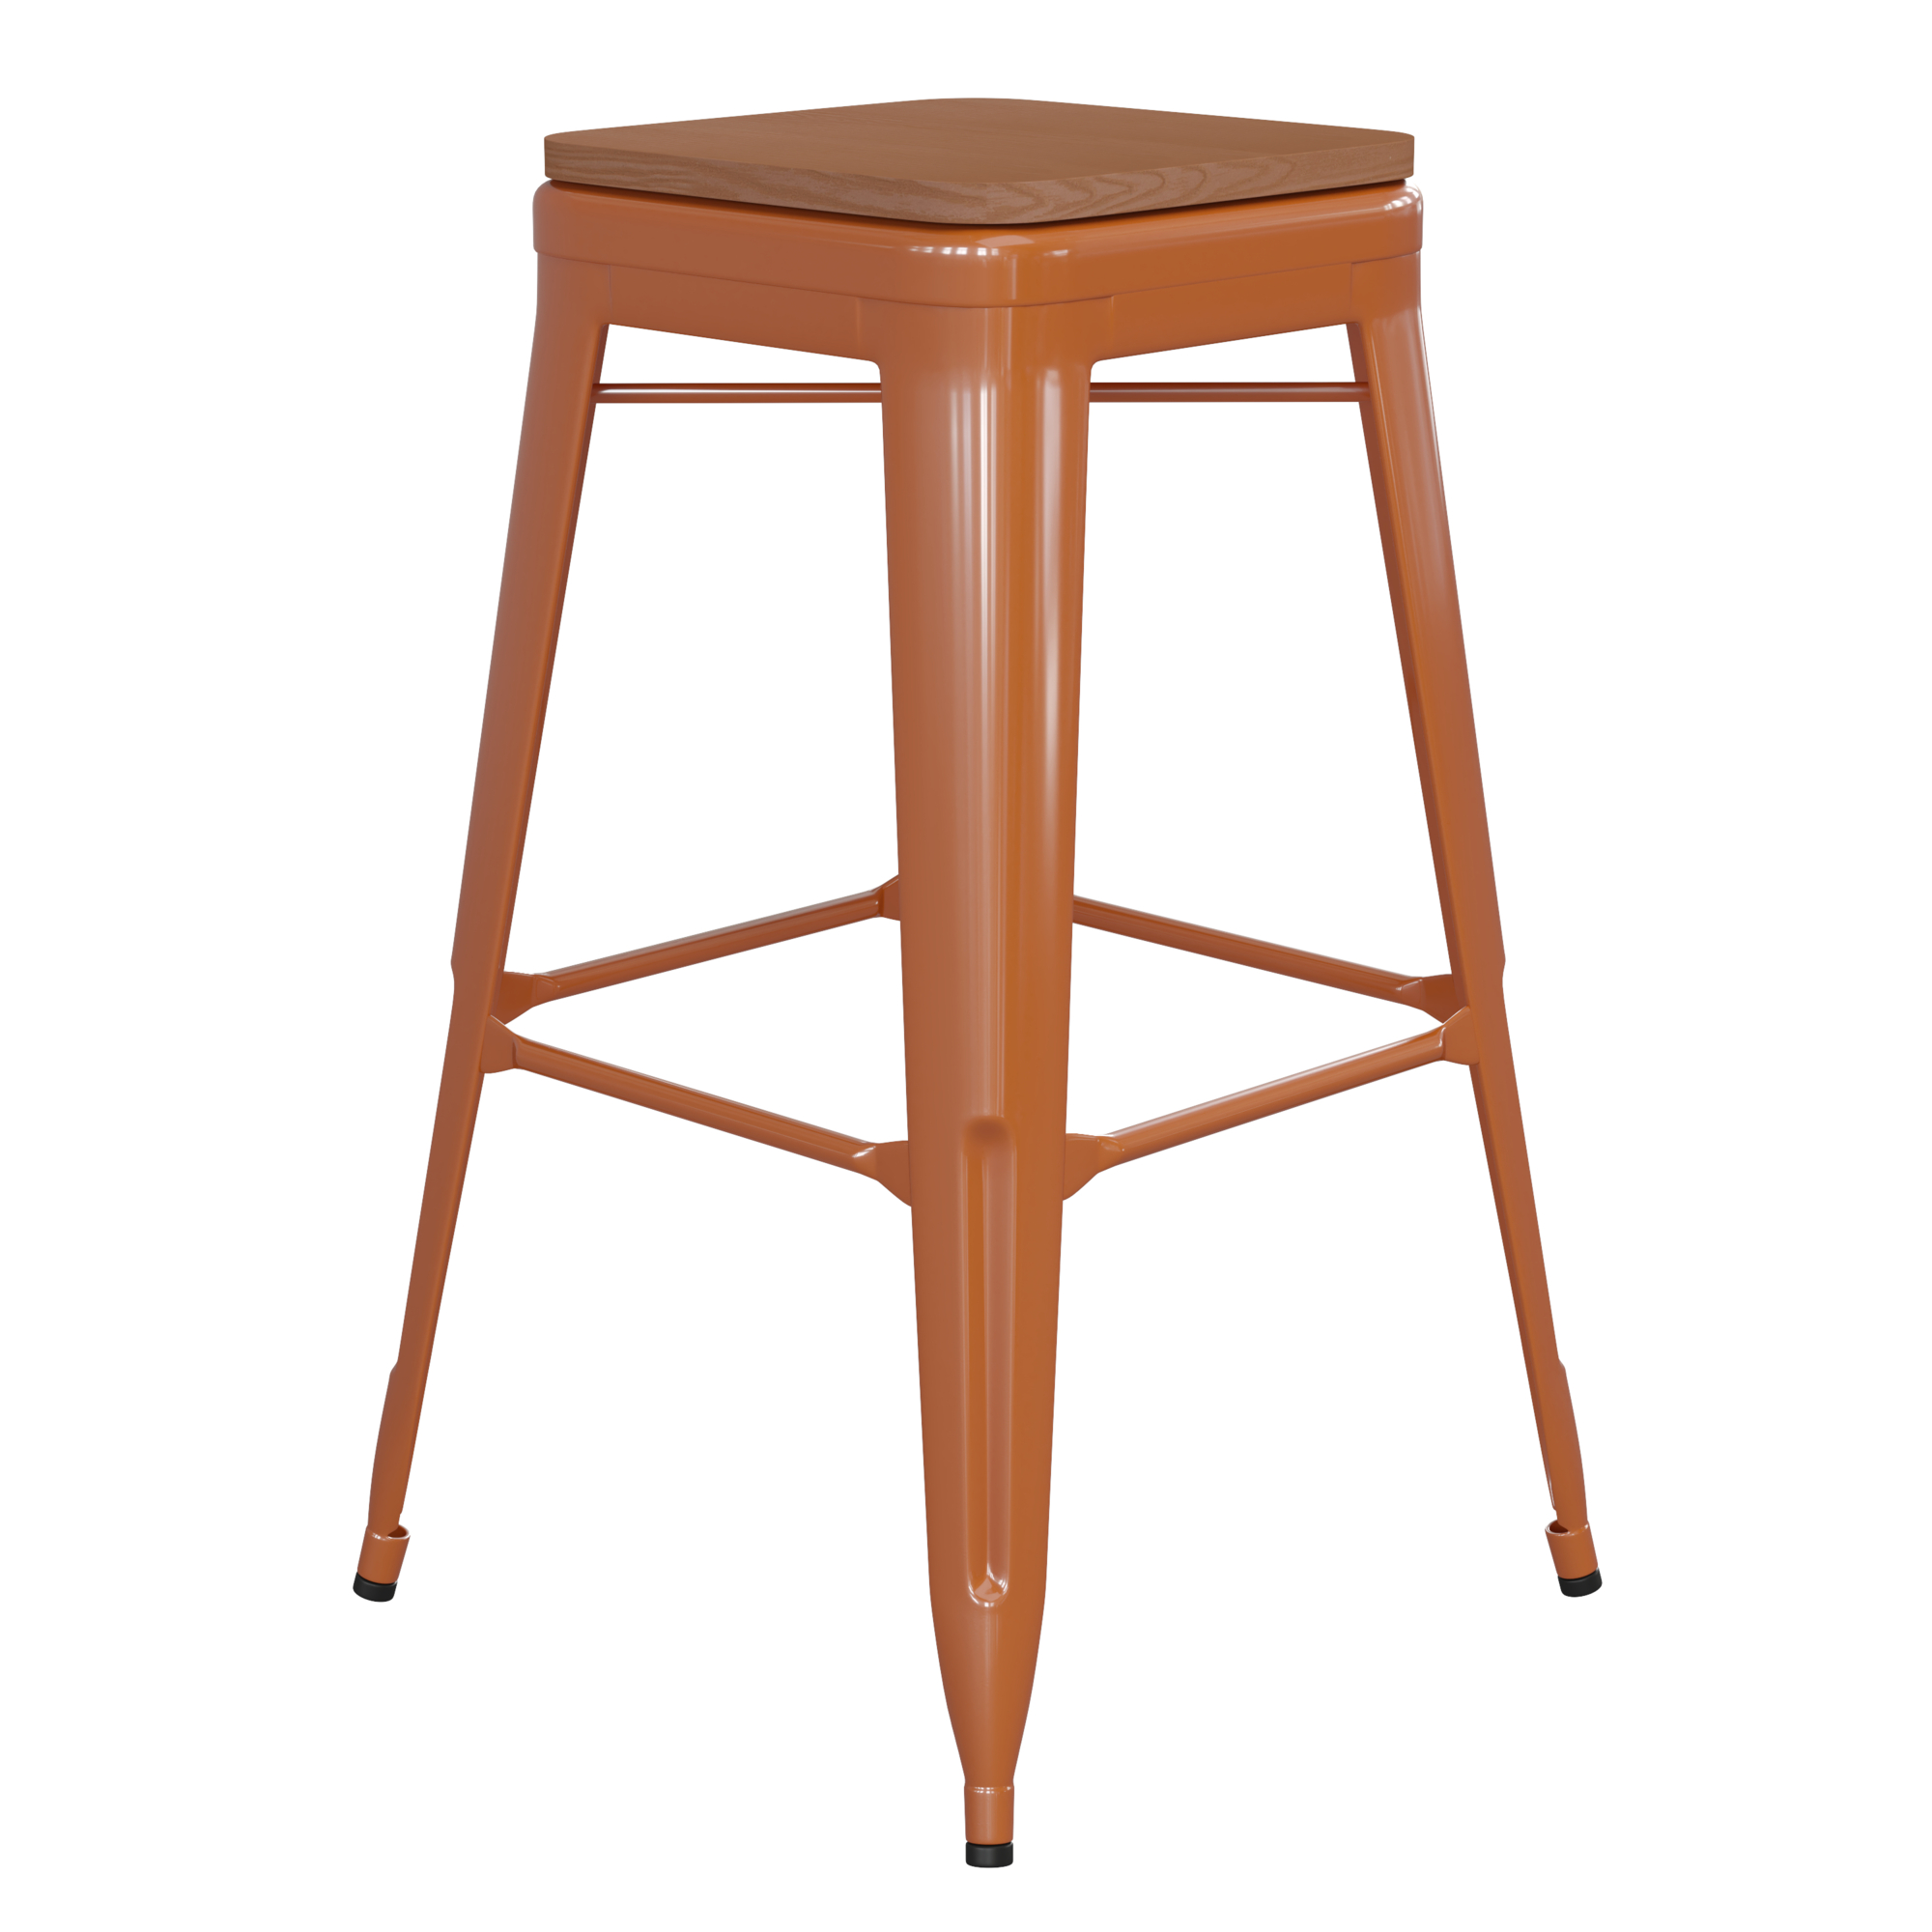 Flash Furniture, 30Inch Orange Metal Stool-Teak Poly Seat, Primary Color Orange, Included (qty.) 1, Model CH3132030ORPL2T